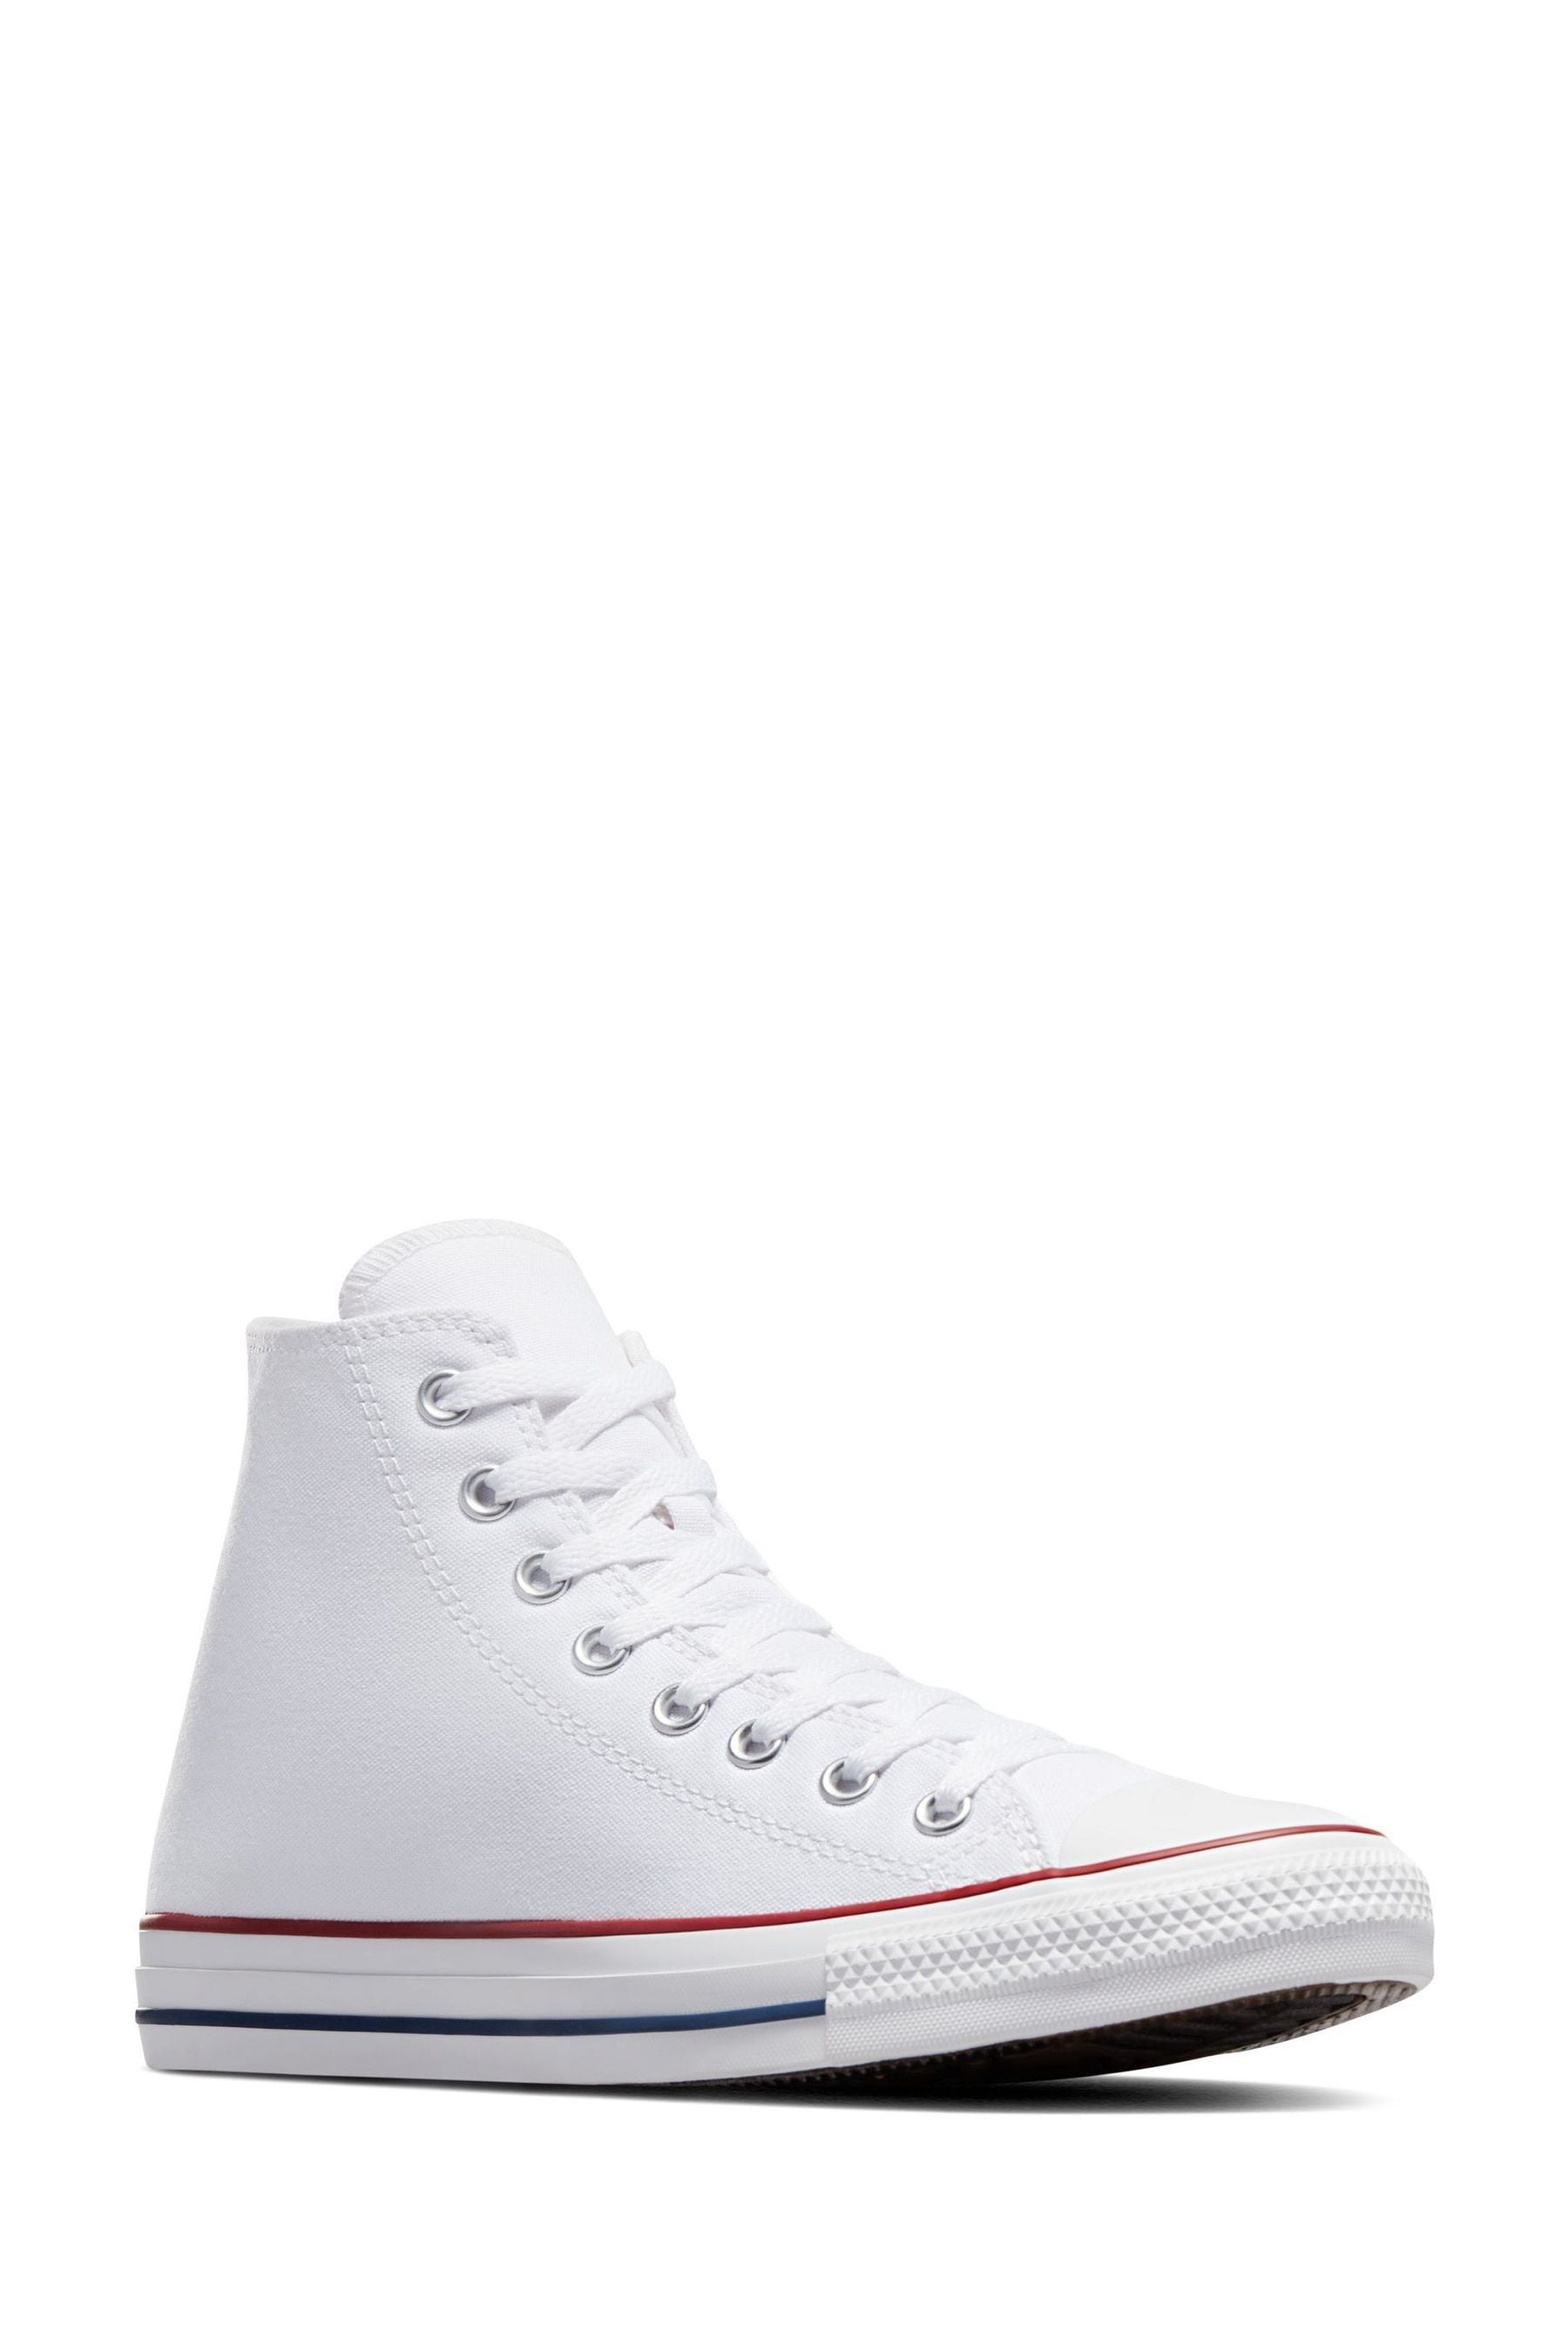 Buy Converse Chuck Taylor All Star High Trainers from Next Ireland